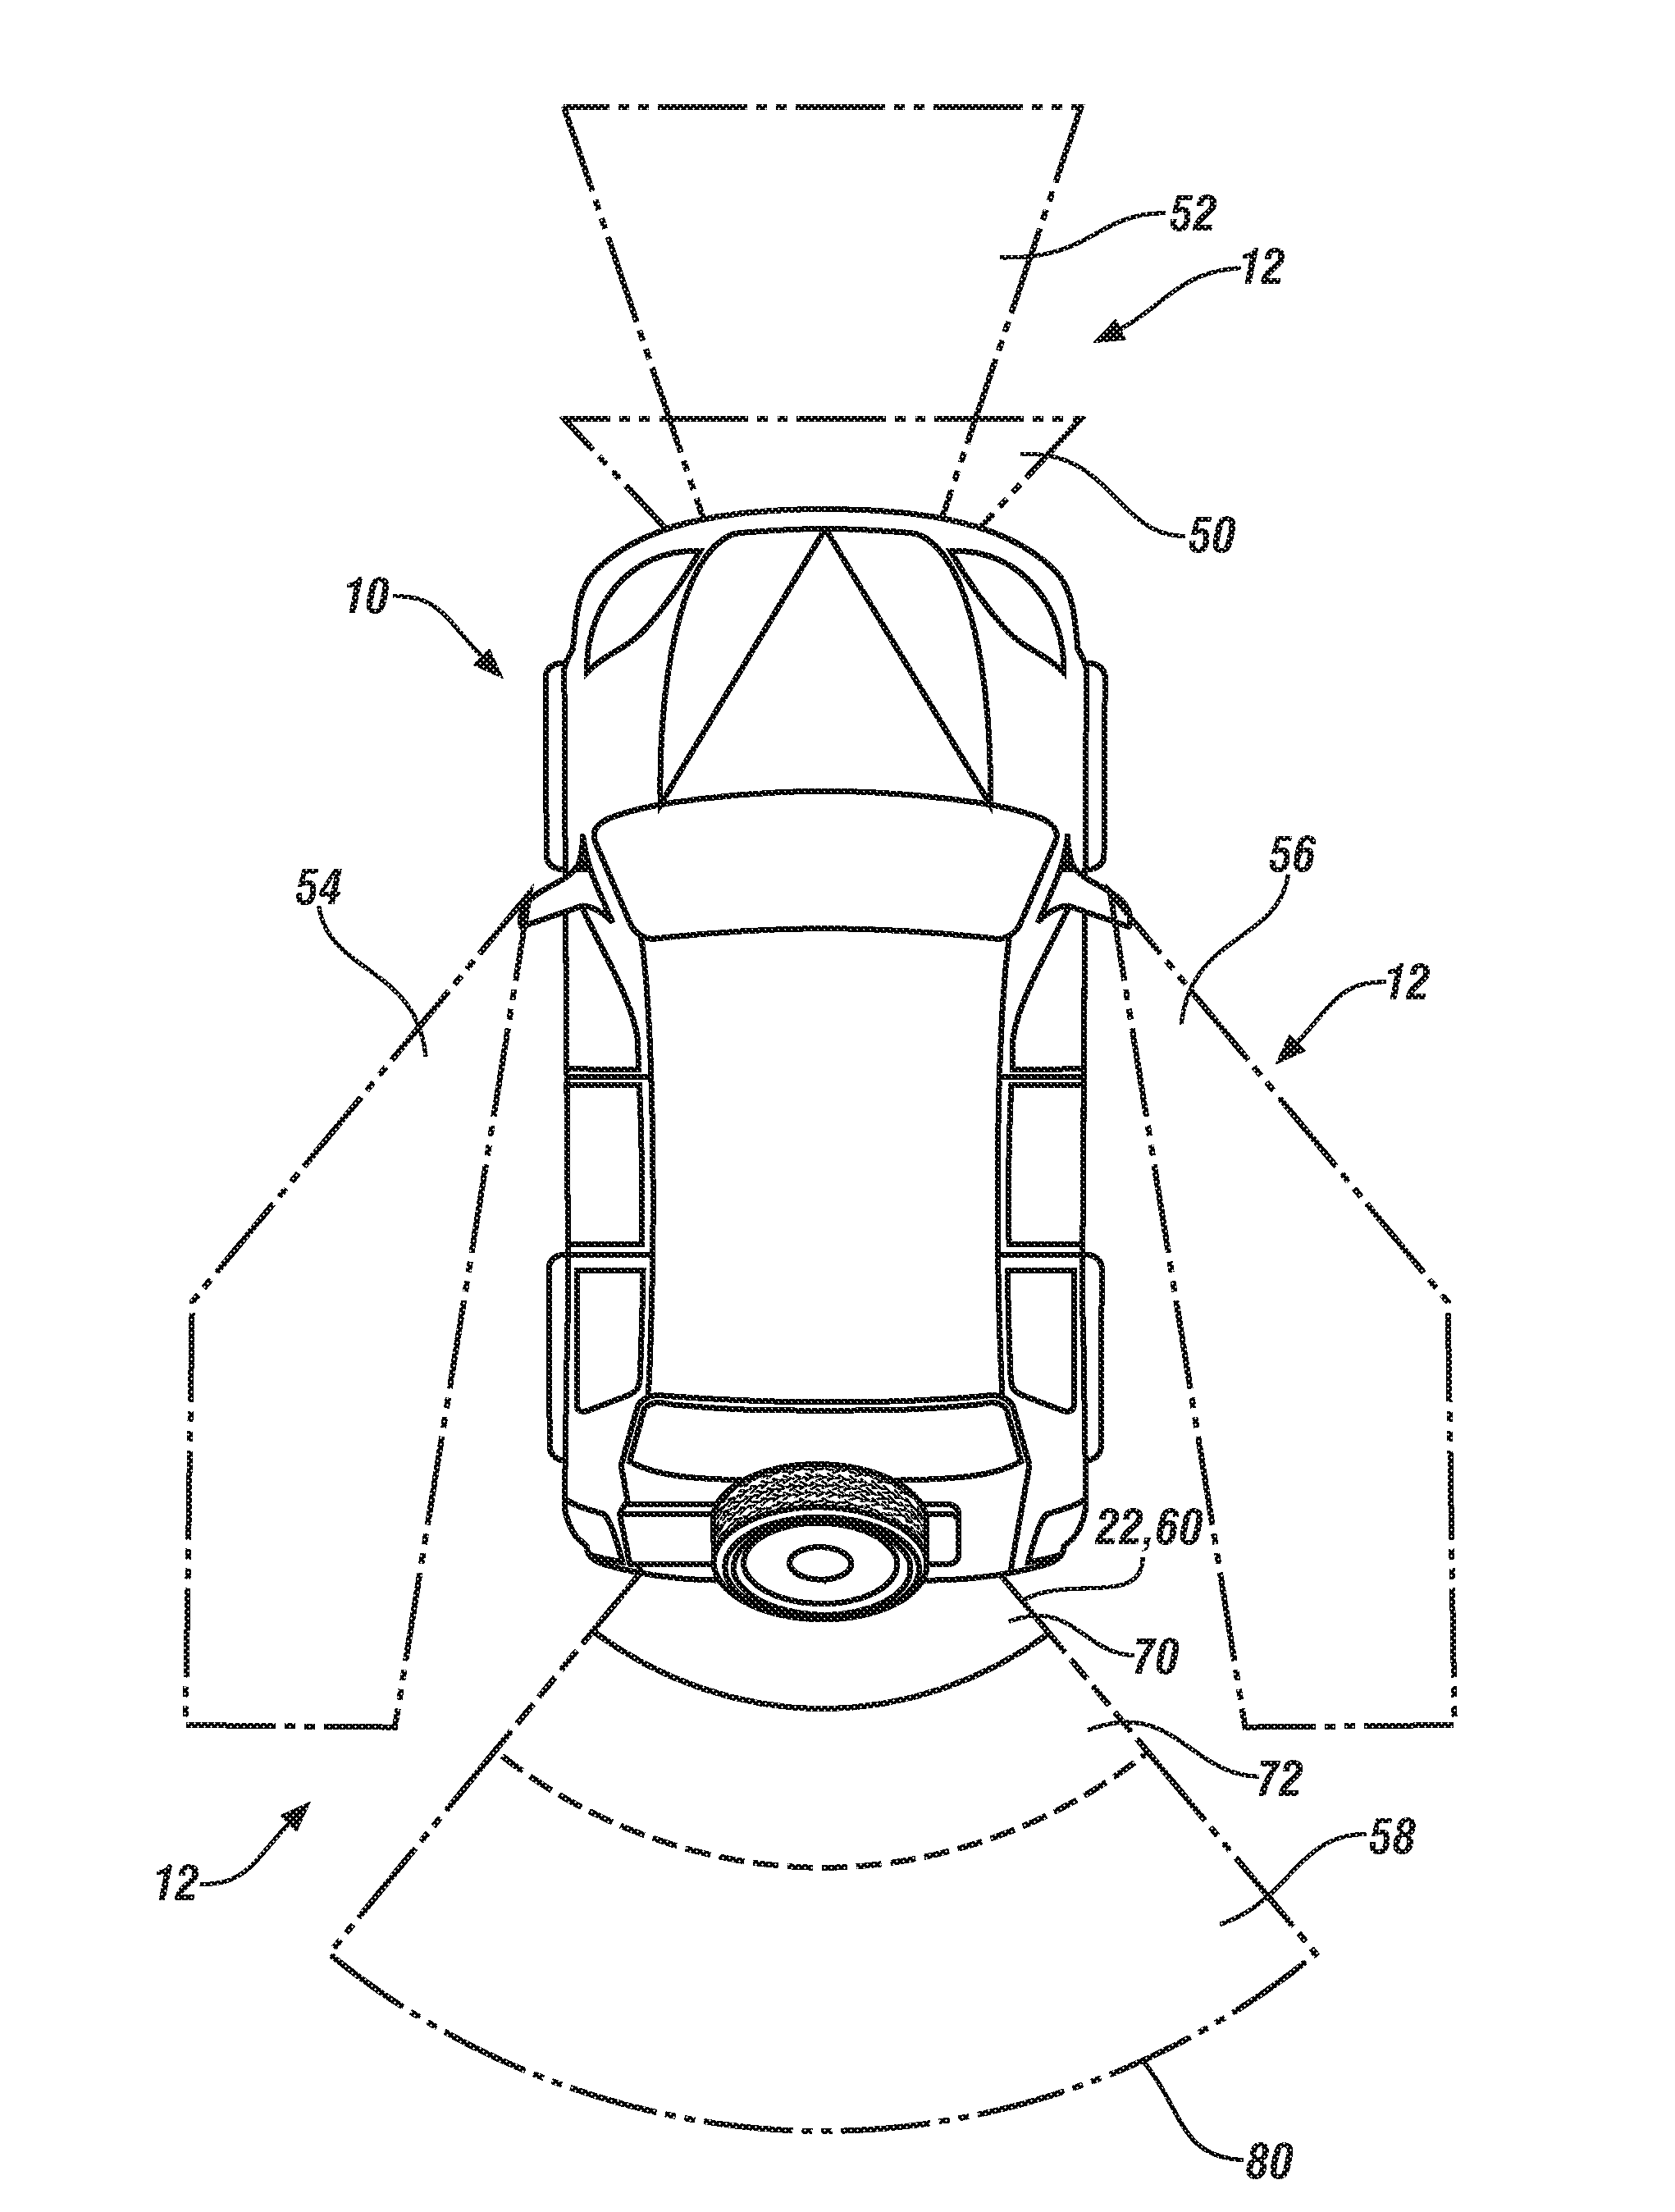 Systems and methods to indicate clearance for vehicle door